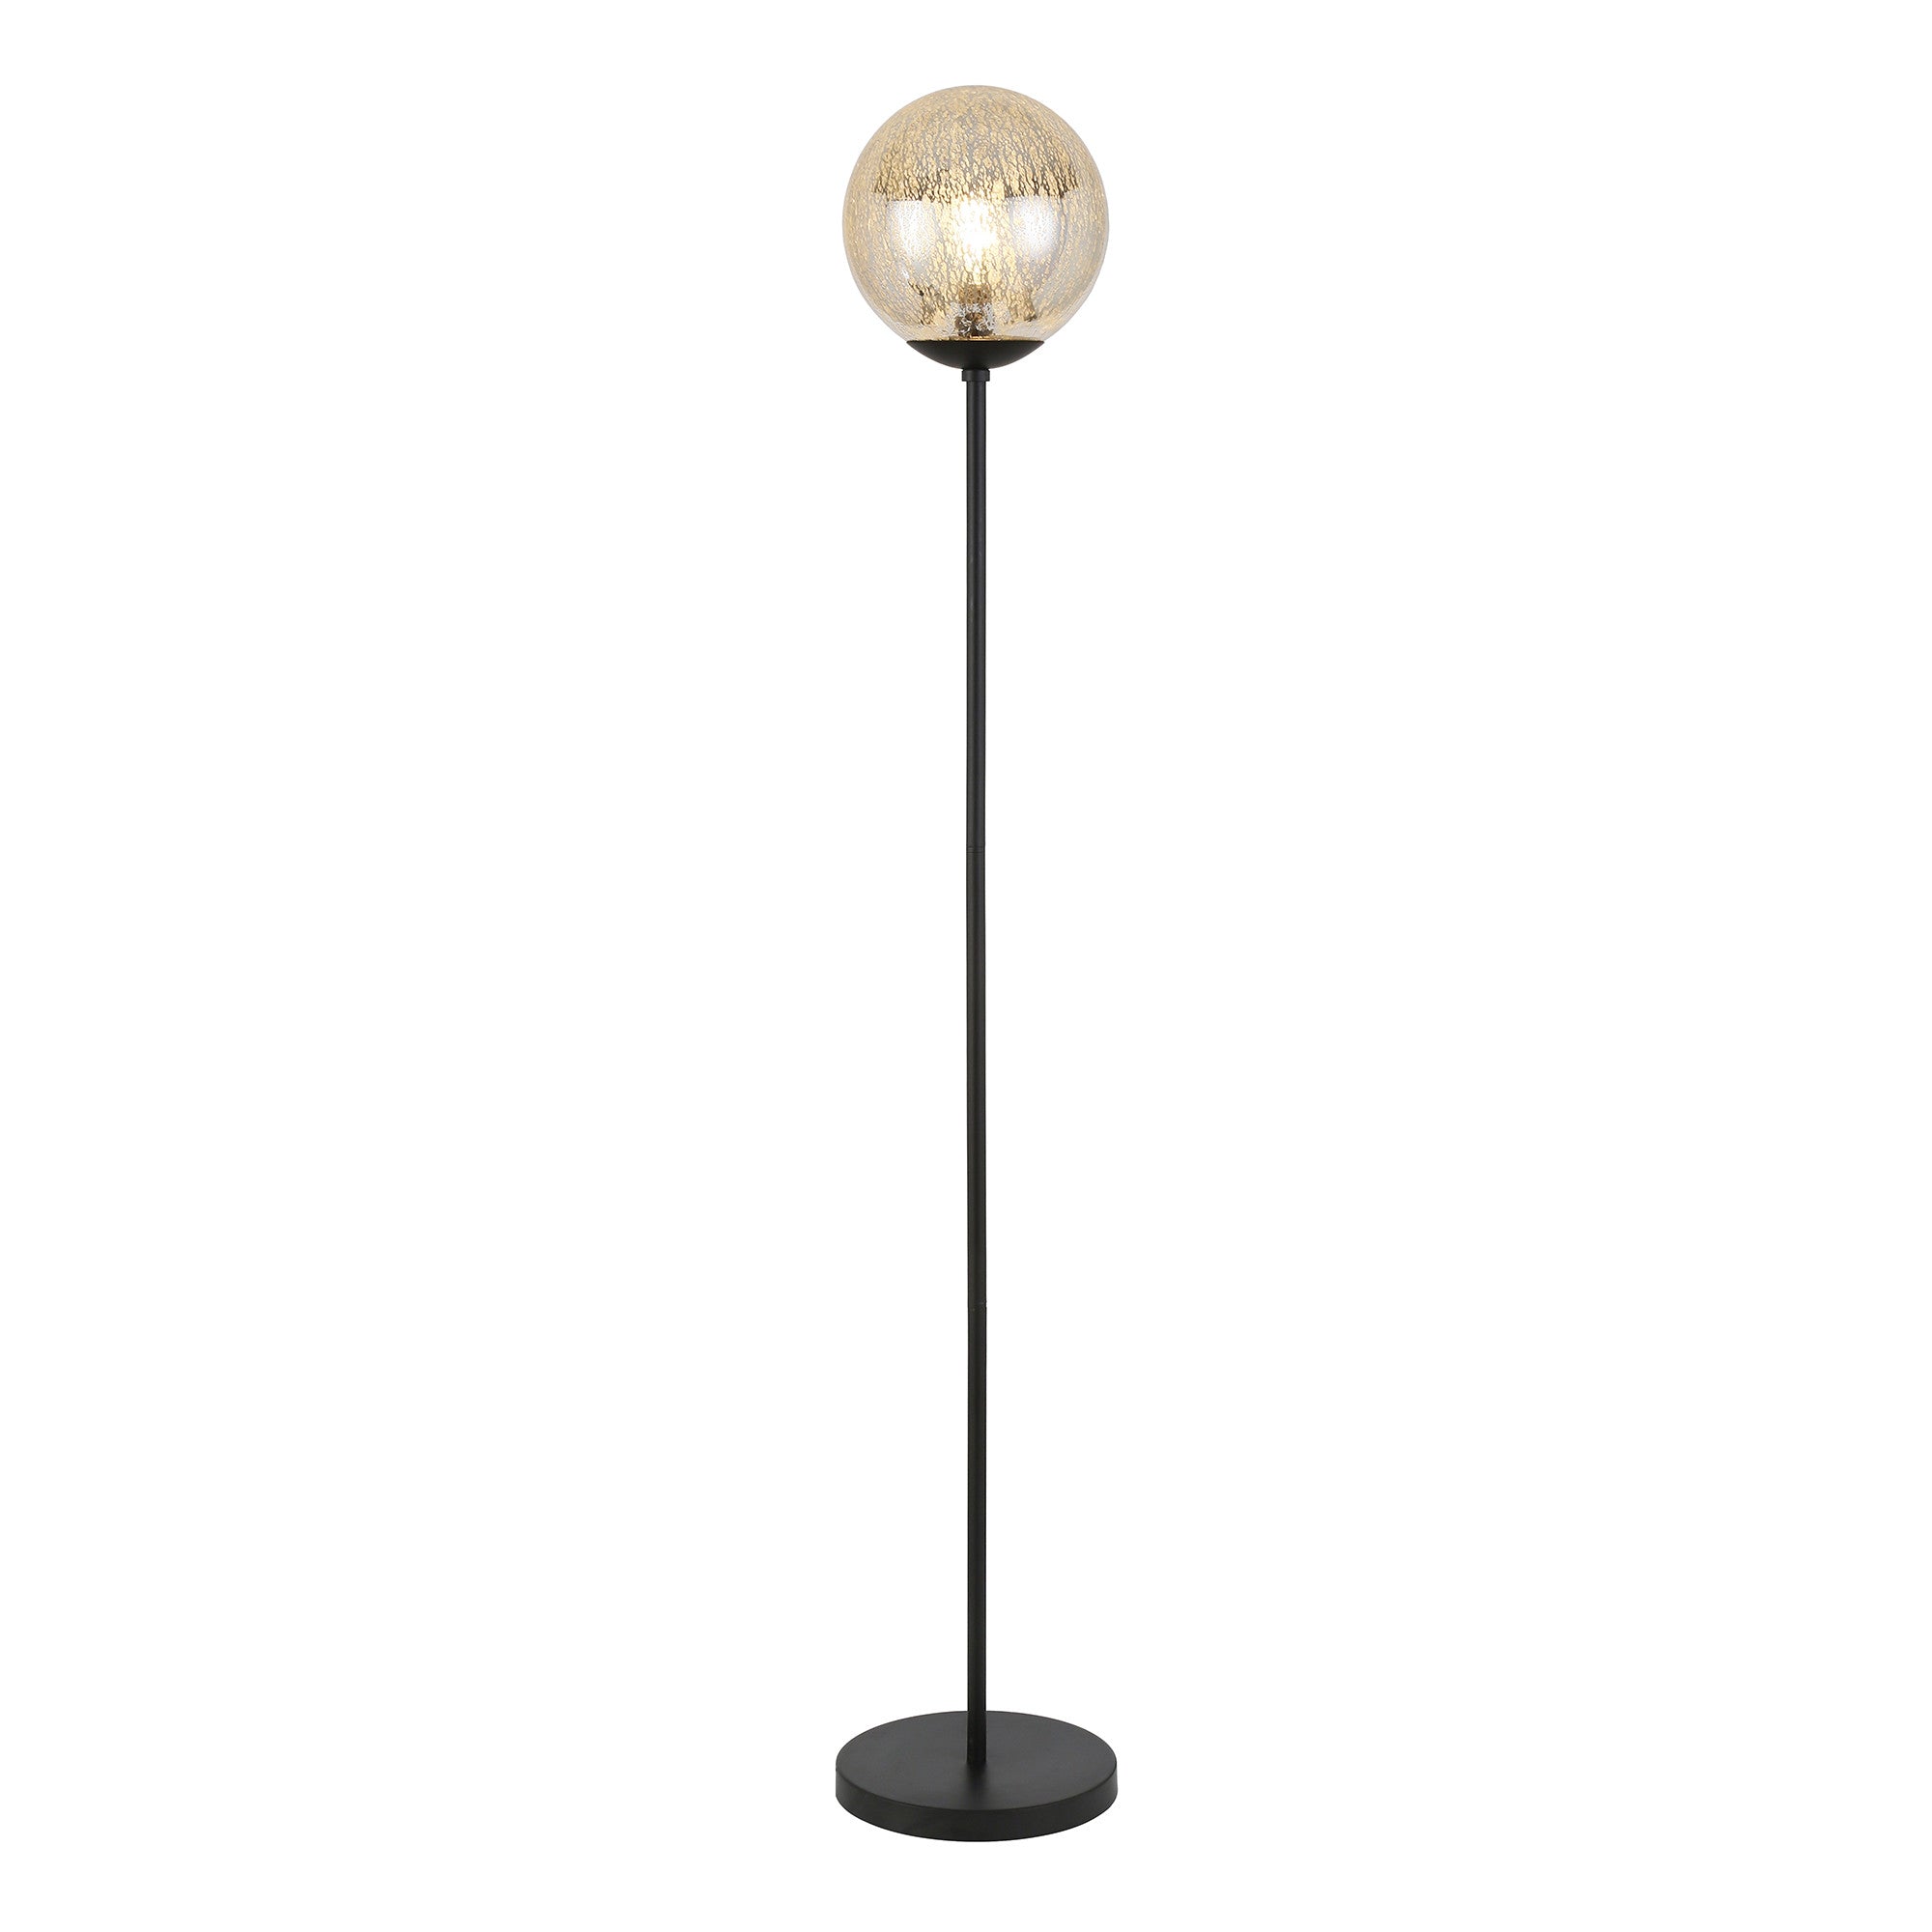 66" Black Novelty Floor Lamp With Clear Transparent Glass Globe Shade